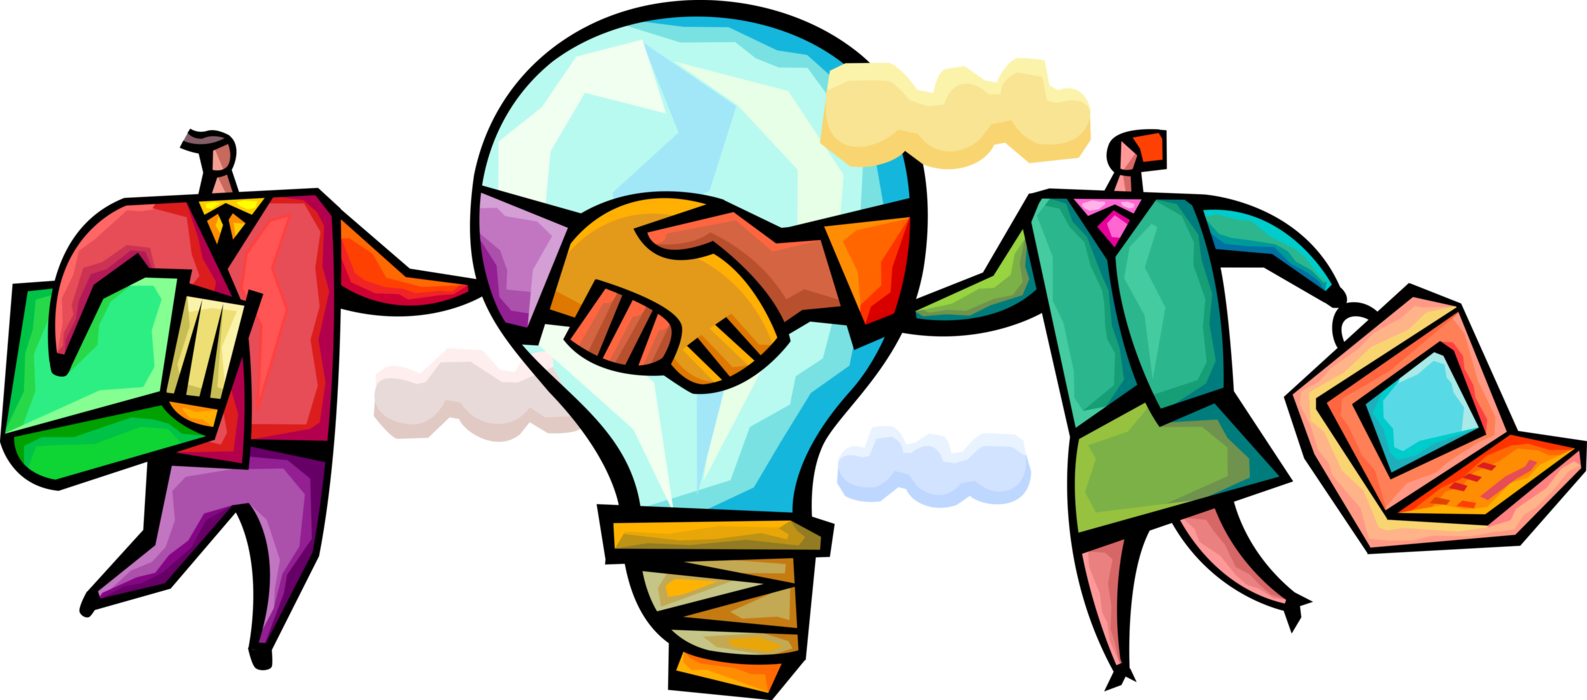 Vector Illustration of Business Colleagues Reach Agreement with Electric Light Bulb Symbol of Invention, Innovation, and Good Ideas